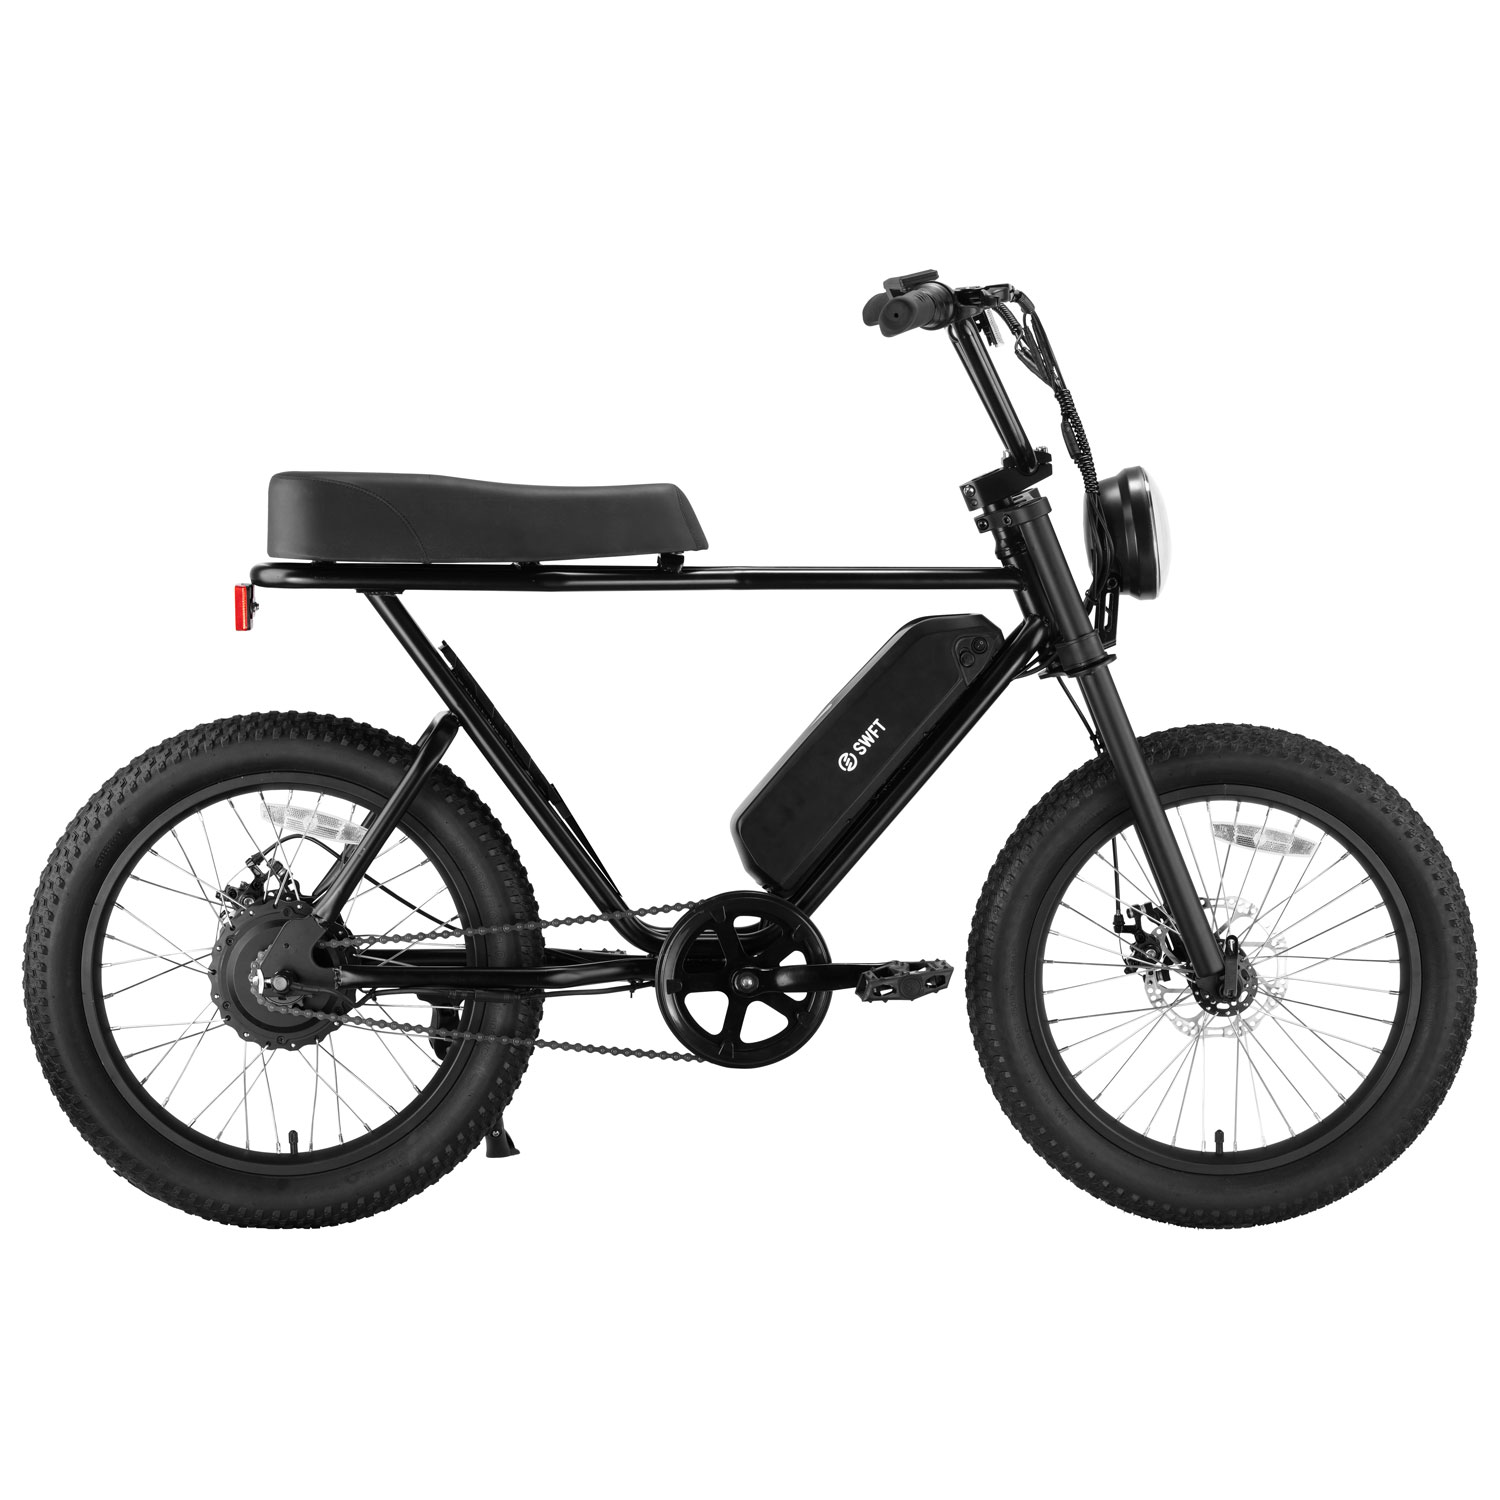 SWFT Zip X Electric City Bike with up to 59.5km Battery Life - Black